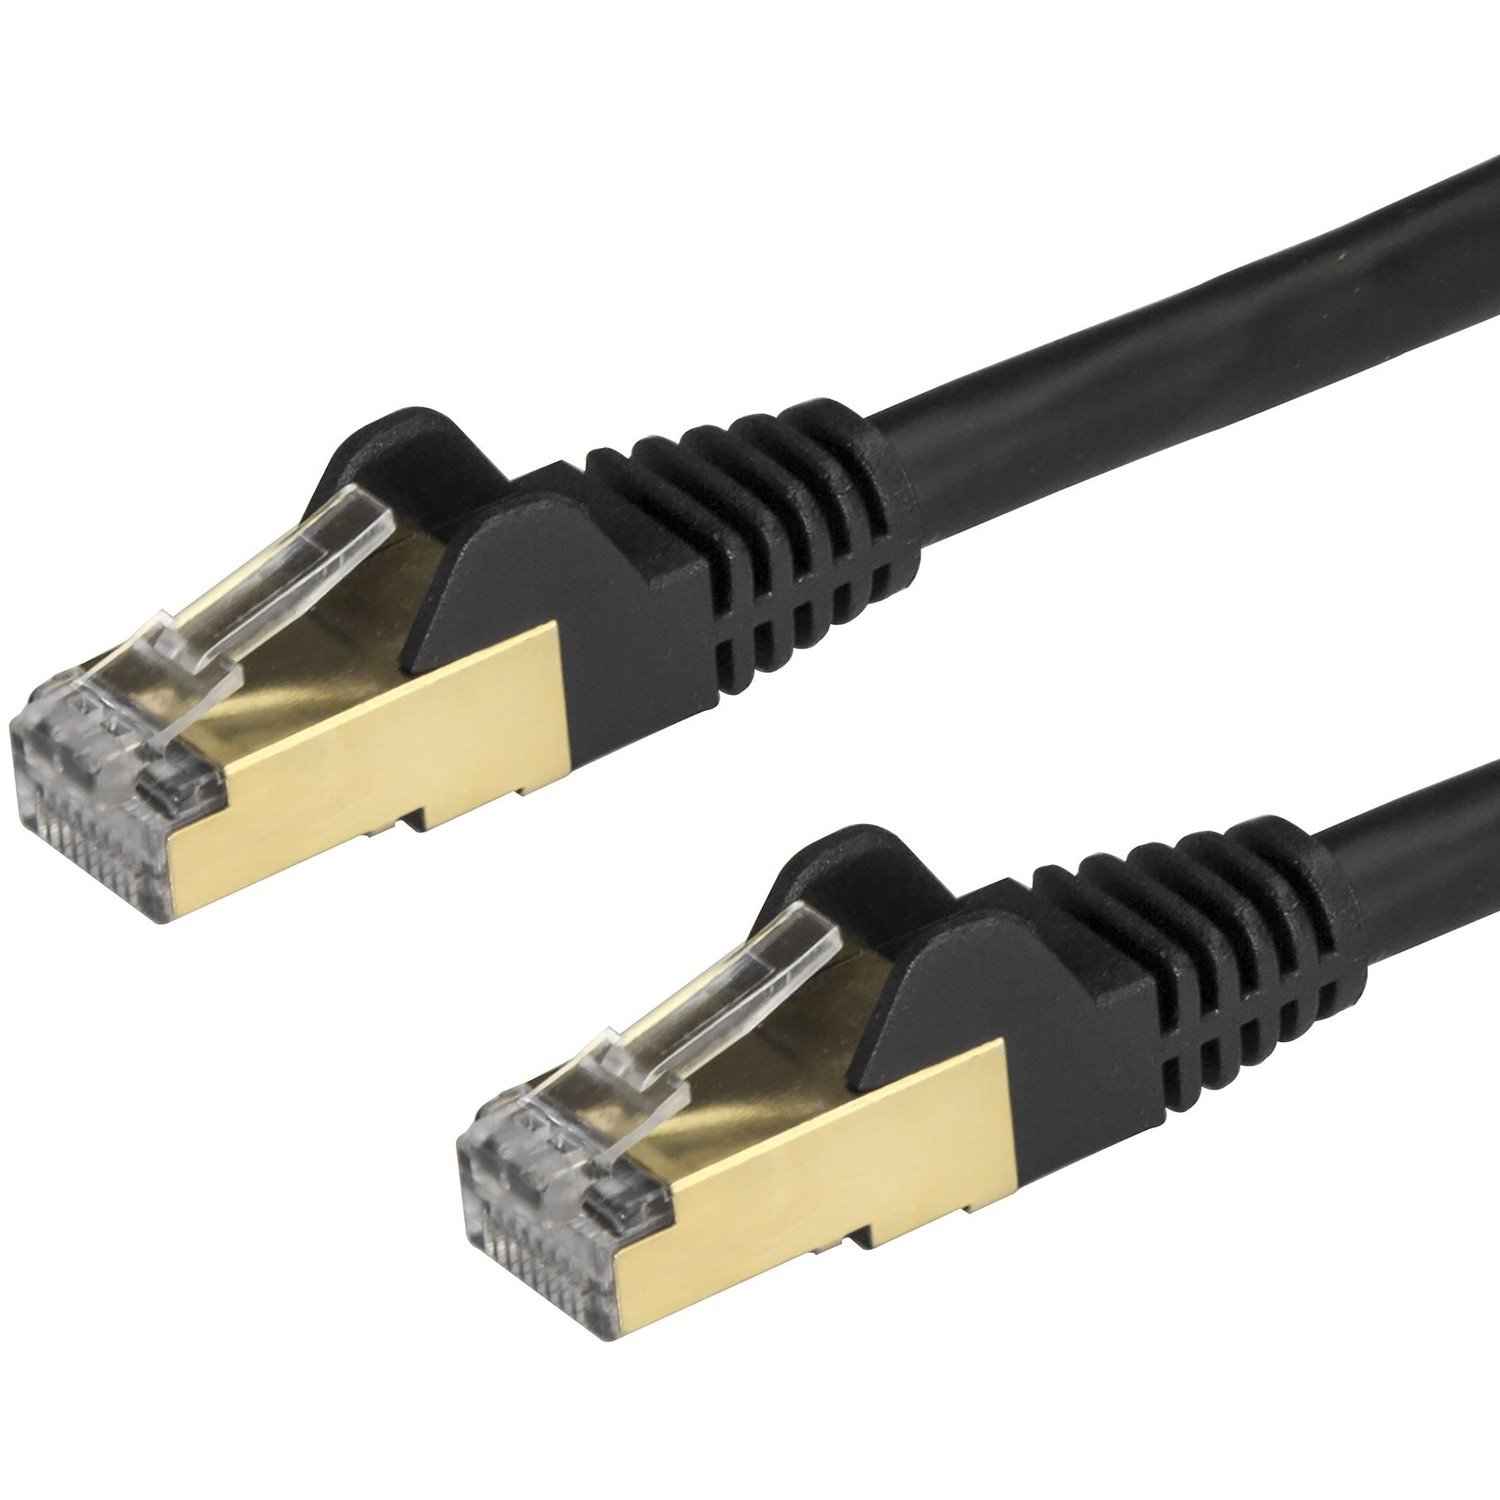 StarTech.com 3 m Category 6a Network Cable for PoE-enabled Device, Computer, Hub, Router, Patch Panel - 1